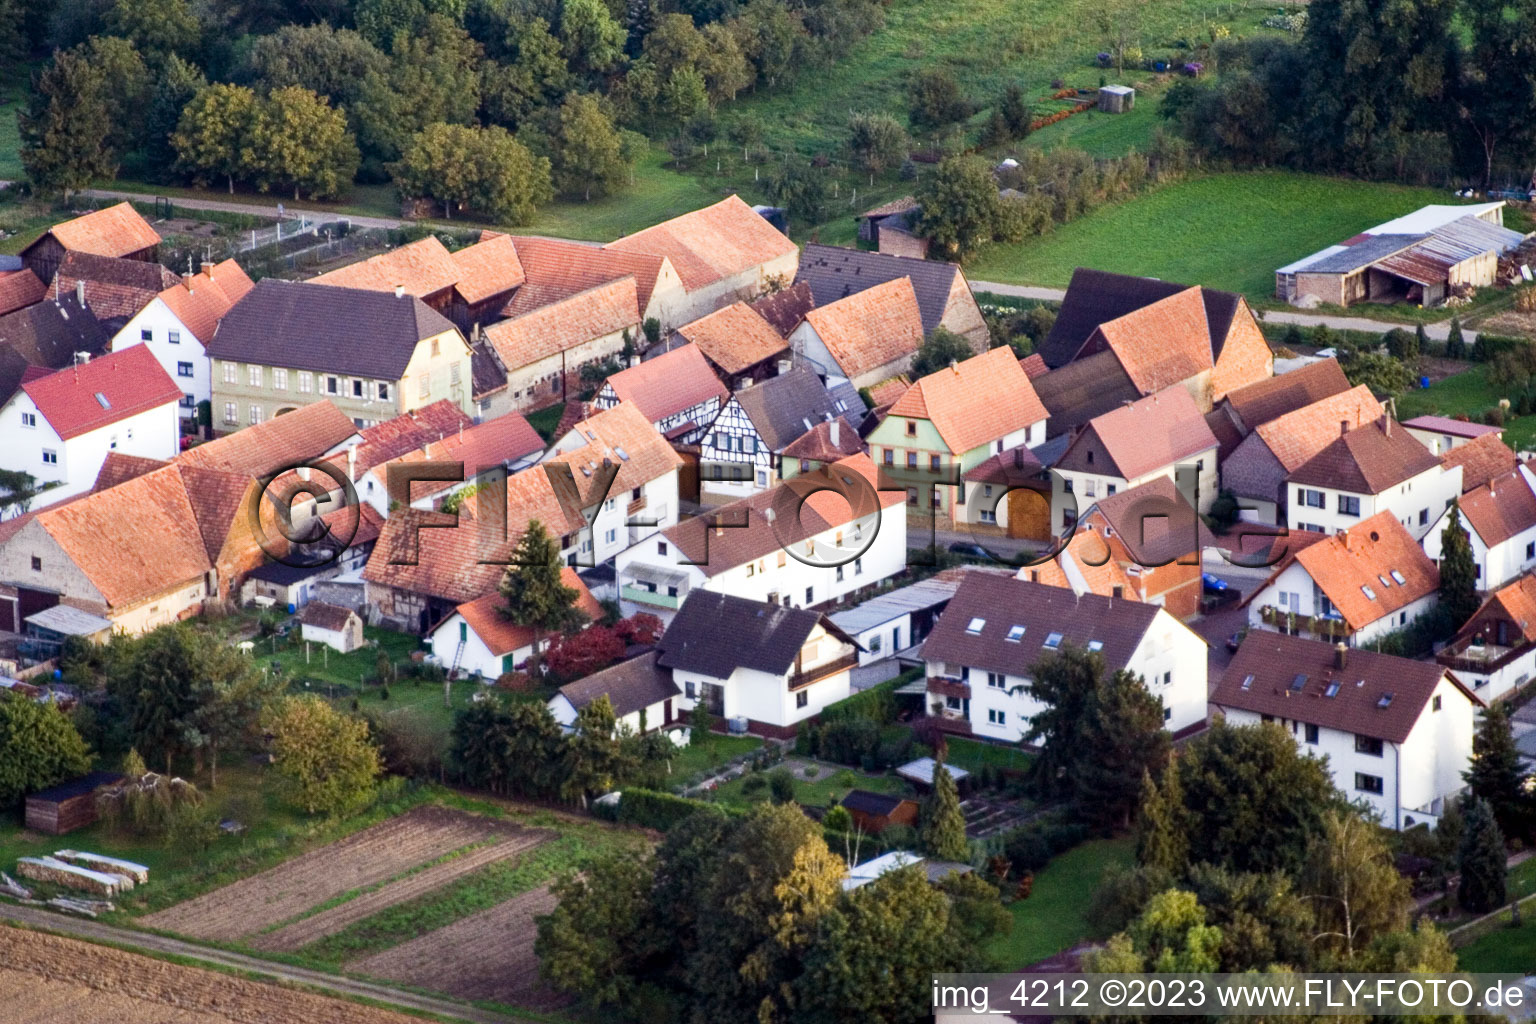 Saarstr in Kandel in the state Rhineland-Palatinate, Germany out of the air